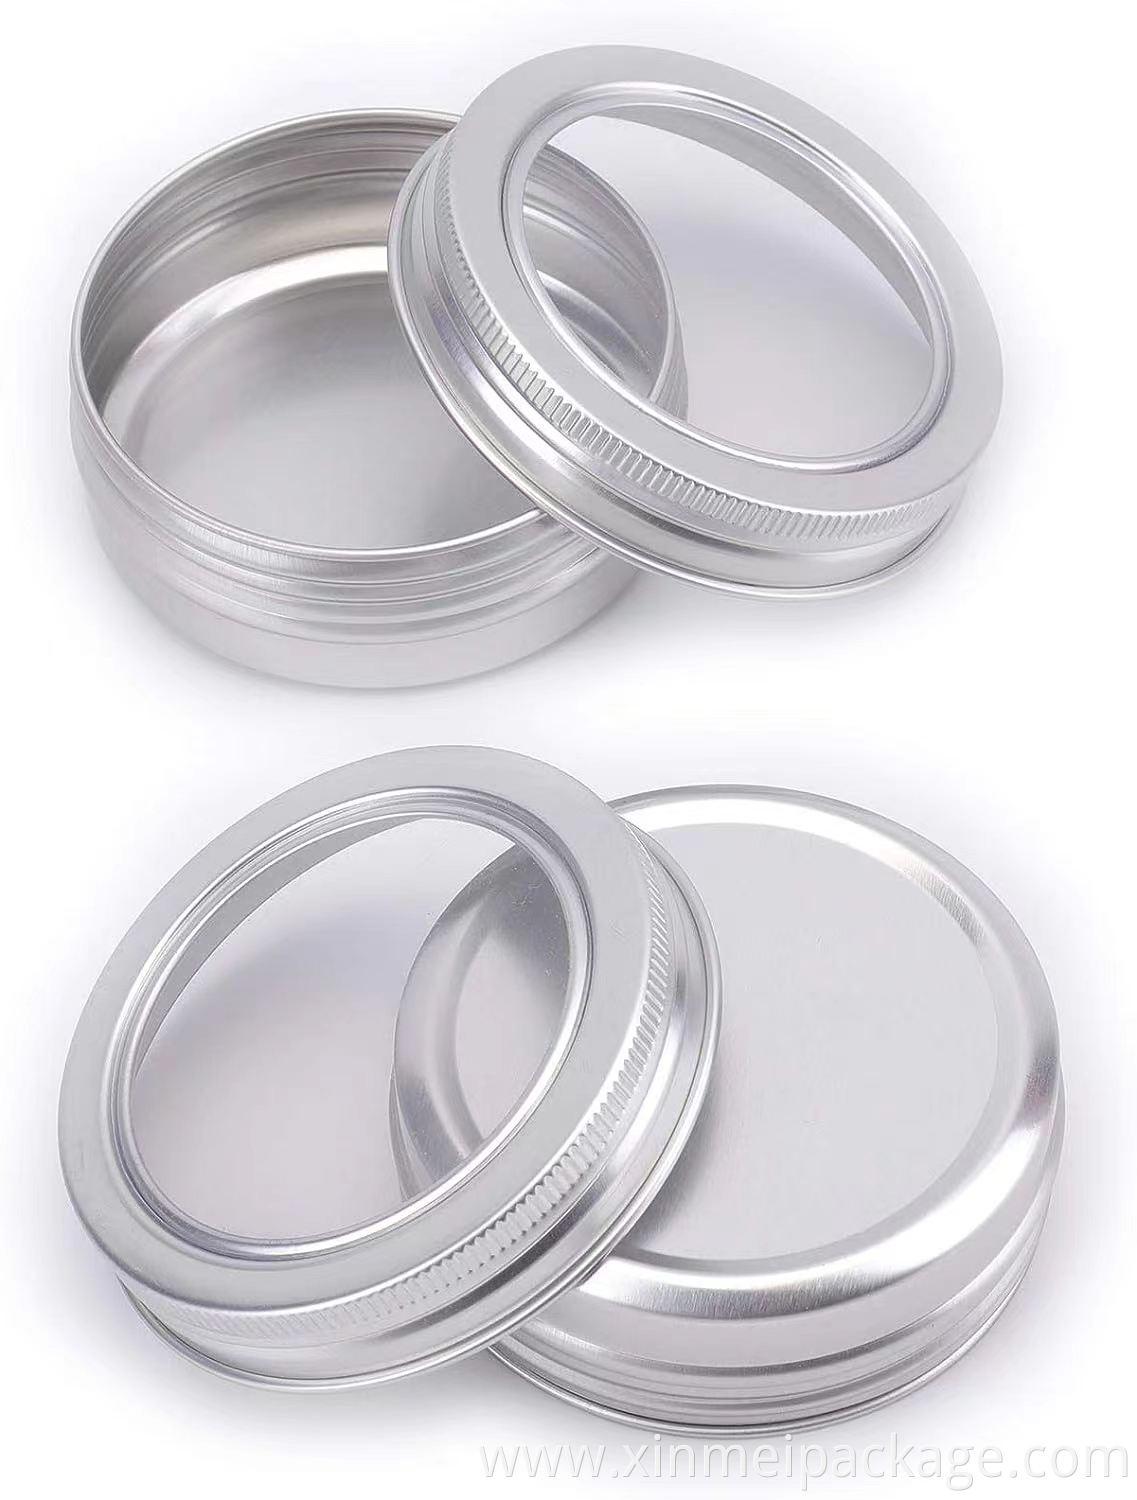 60g aluminum tin with clear lids